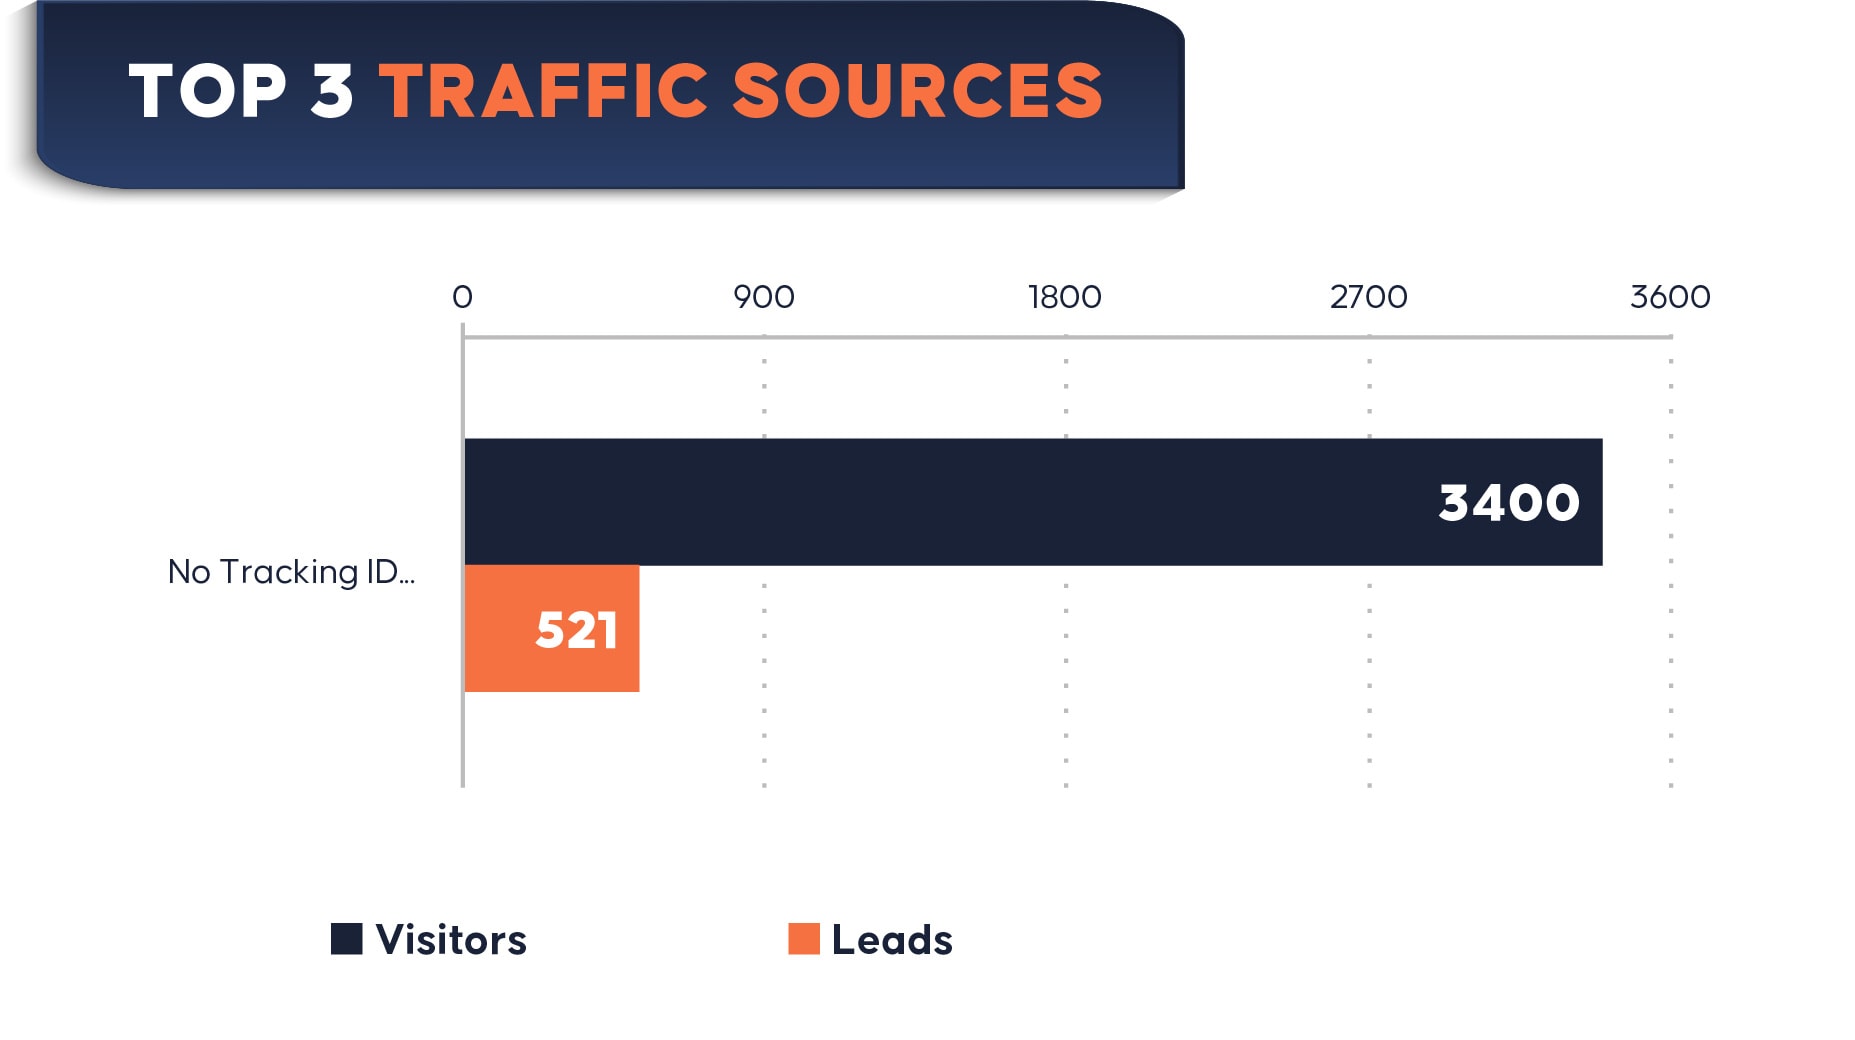 Top 3 Traffic Sources